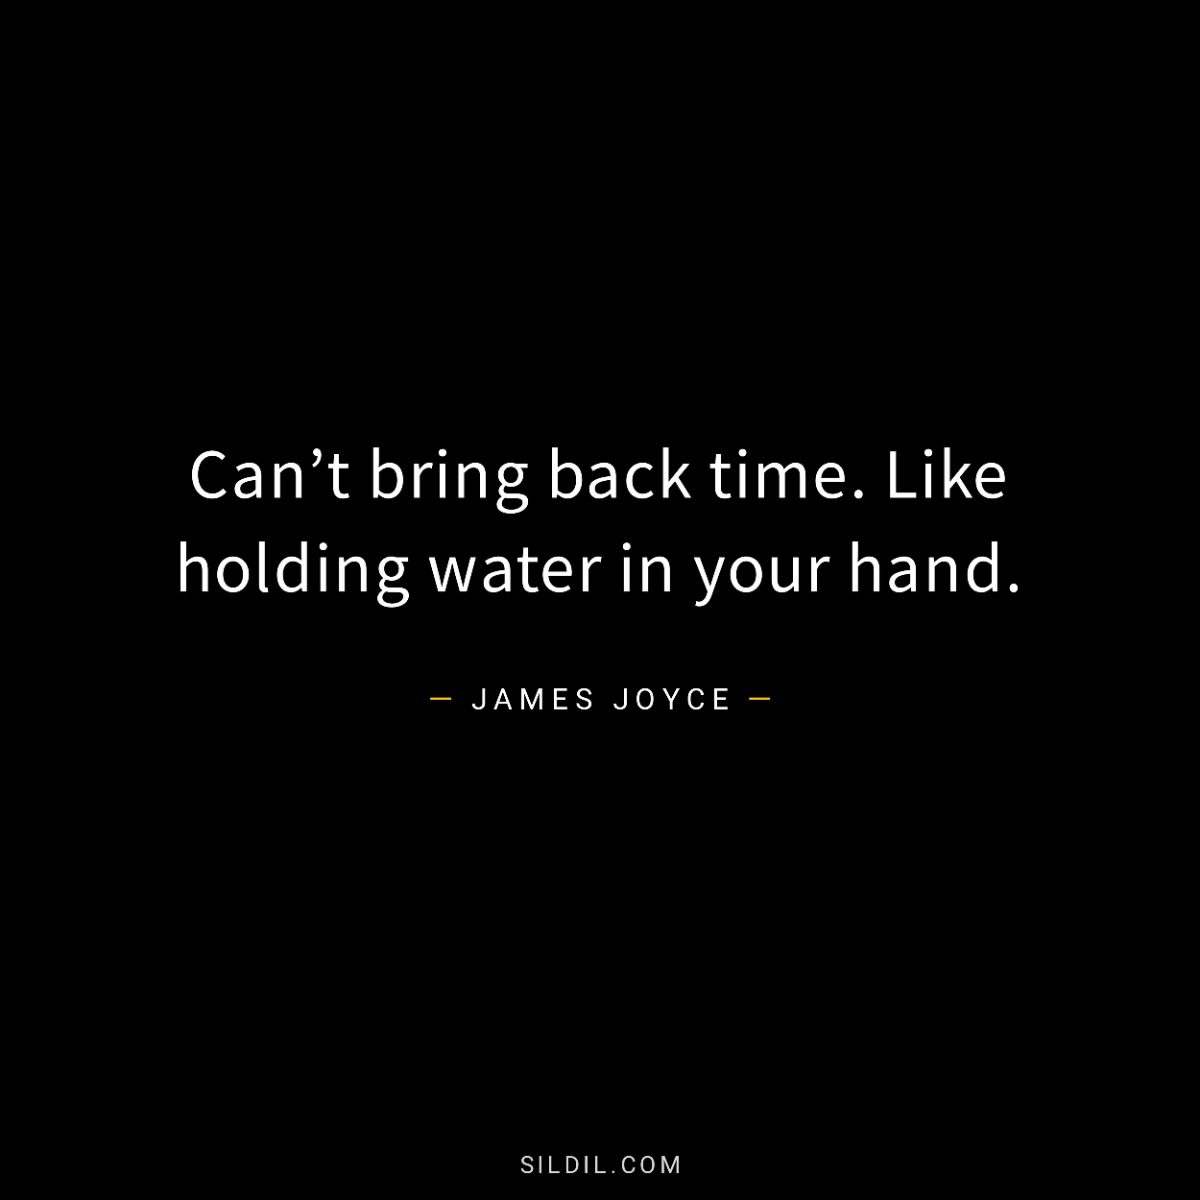 Can’t bring back time. Like holding water in your hand.